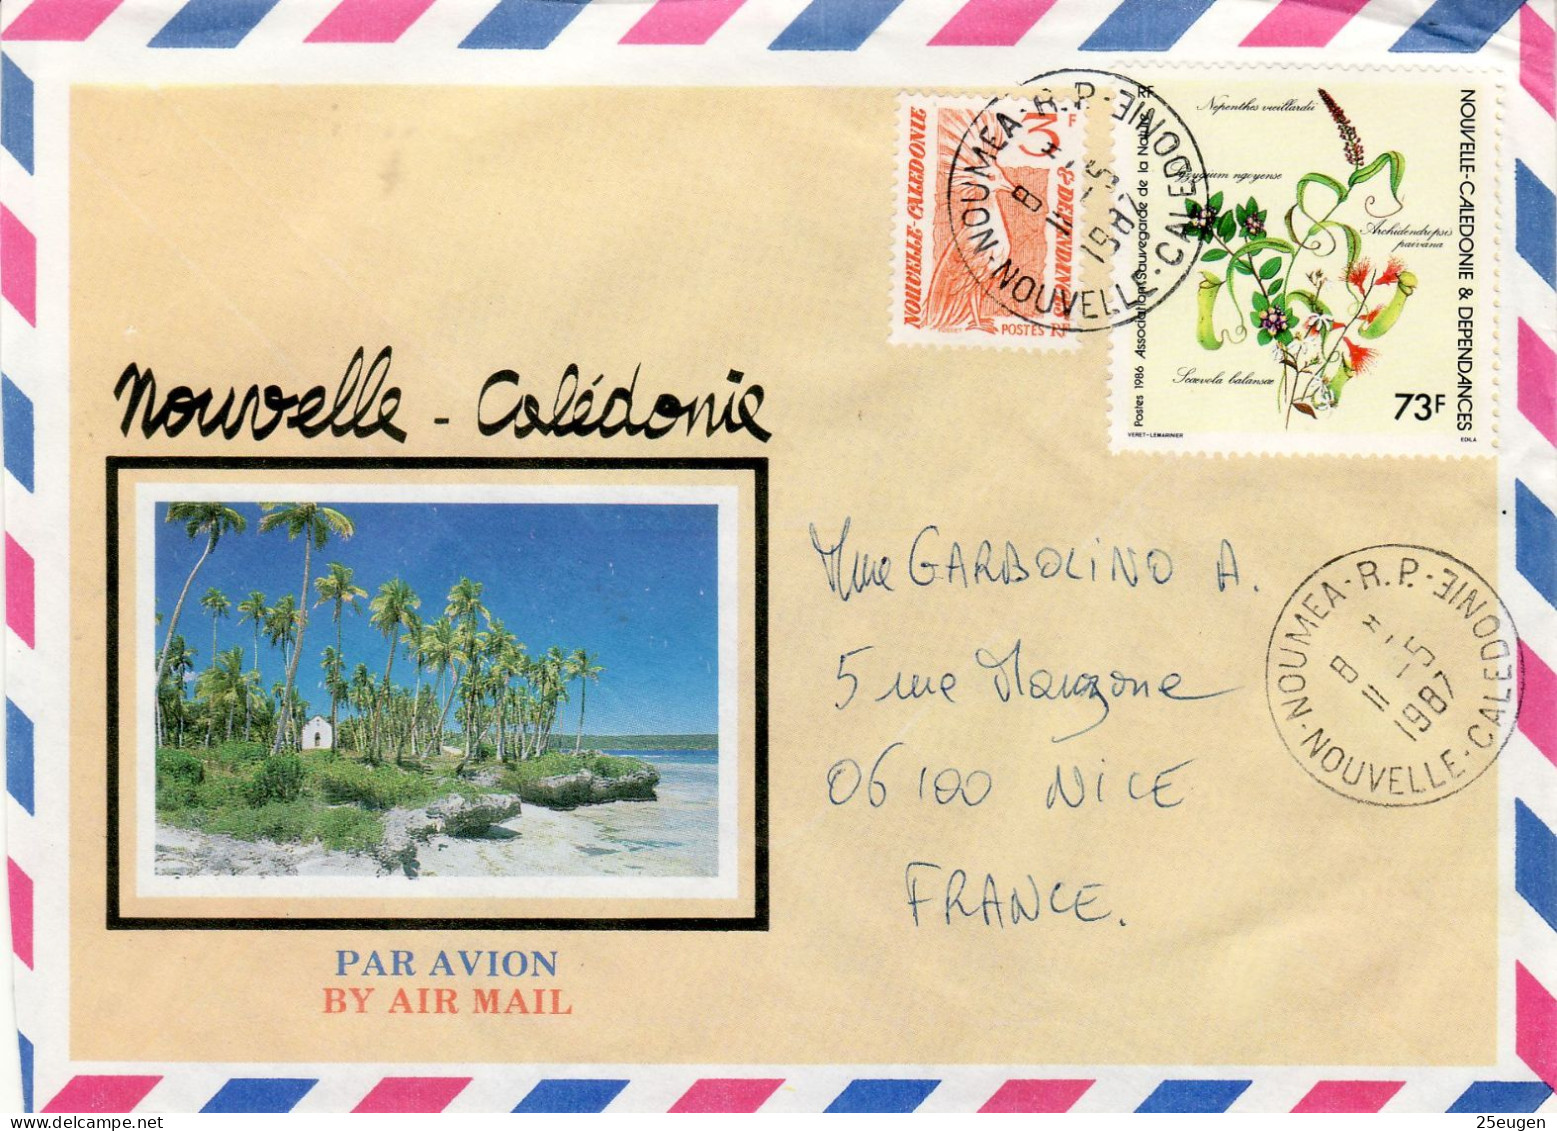 NEW CALEDONIA 1987 AIRMAIL LETTER SENT FROM NOUMEA TO NICE - Covers & Documents